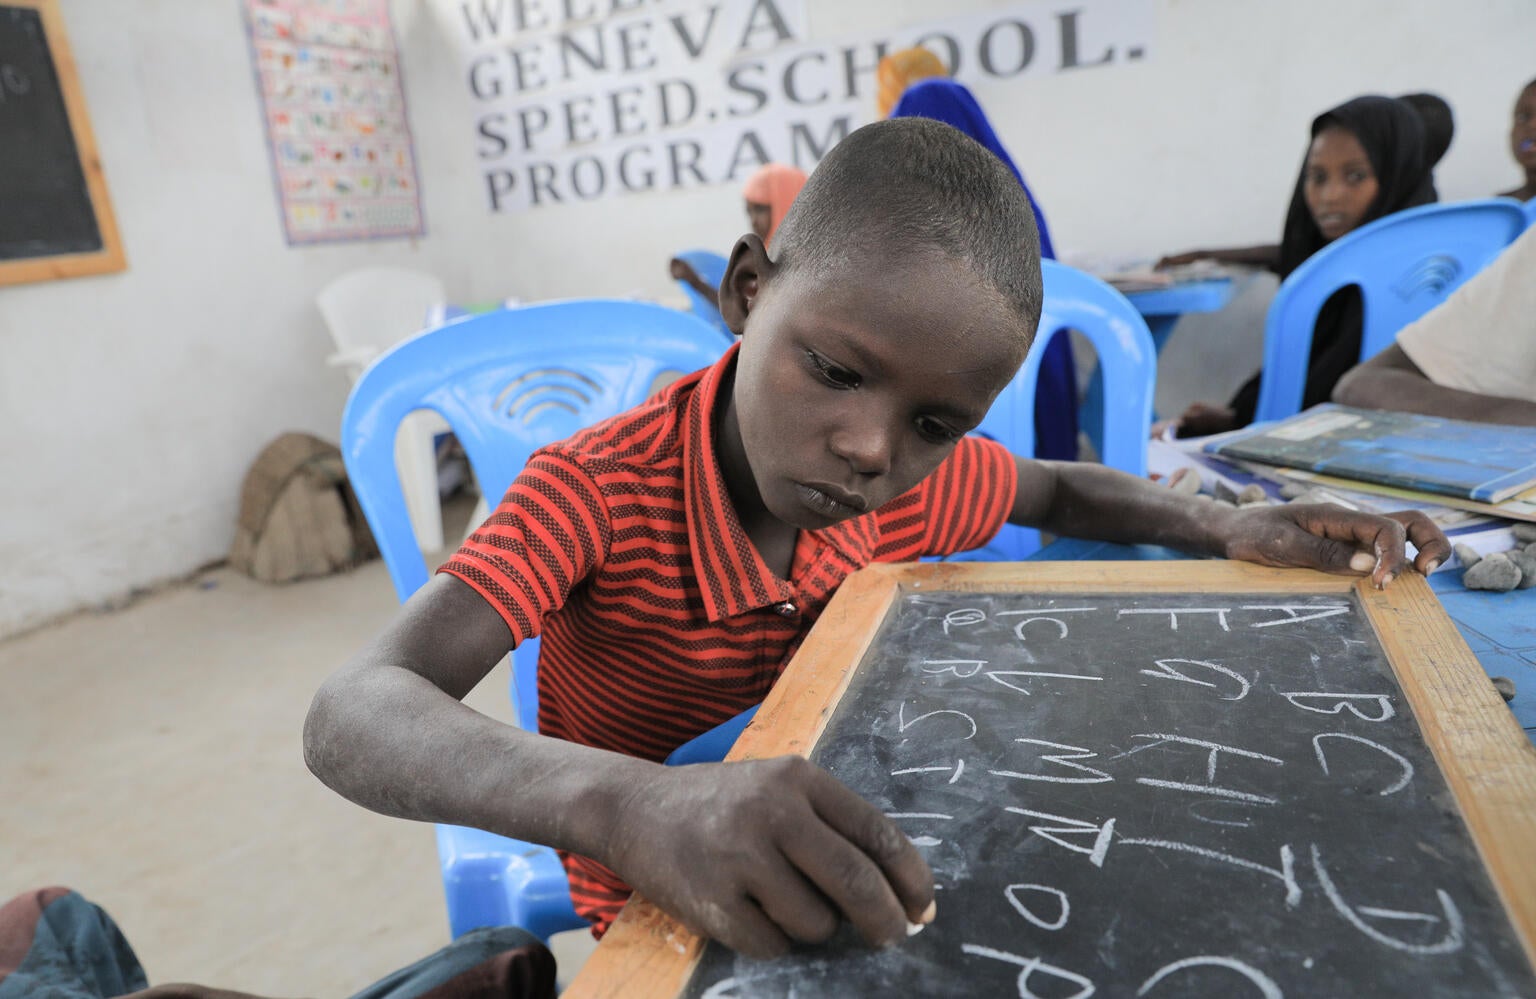 A child in Ethiopia learning to write on a chalkboard.